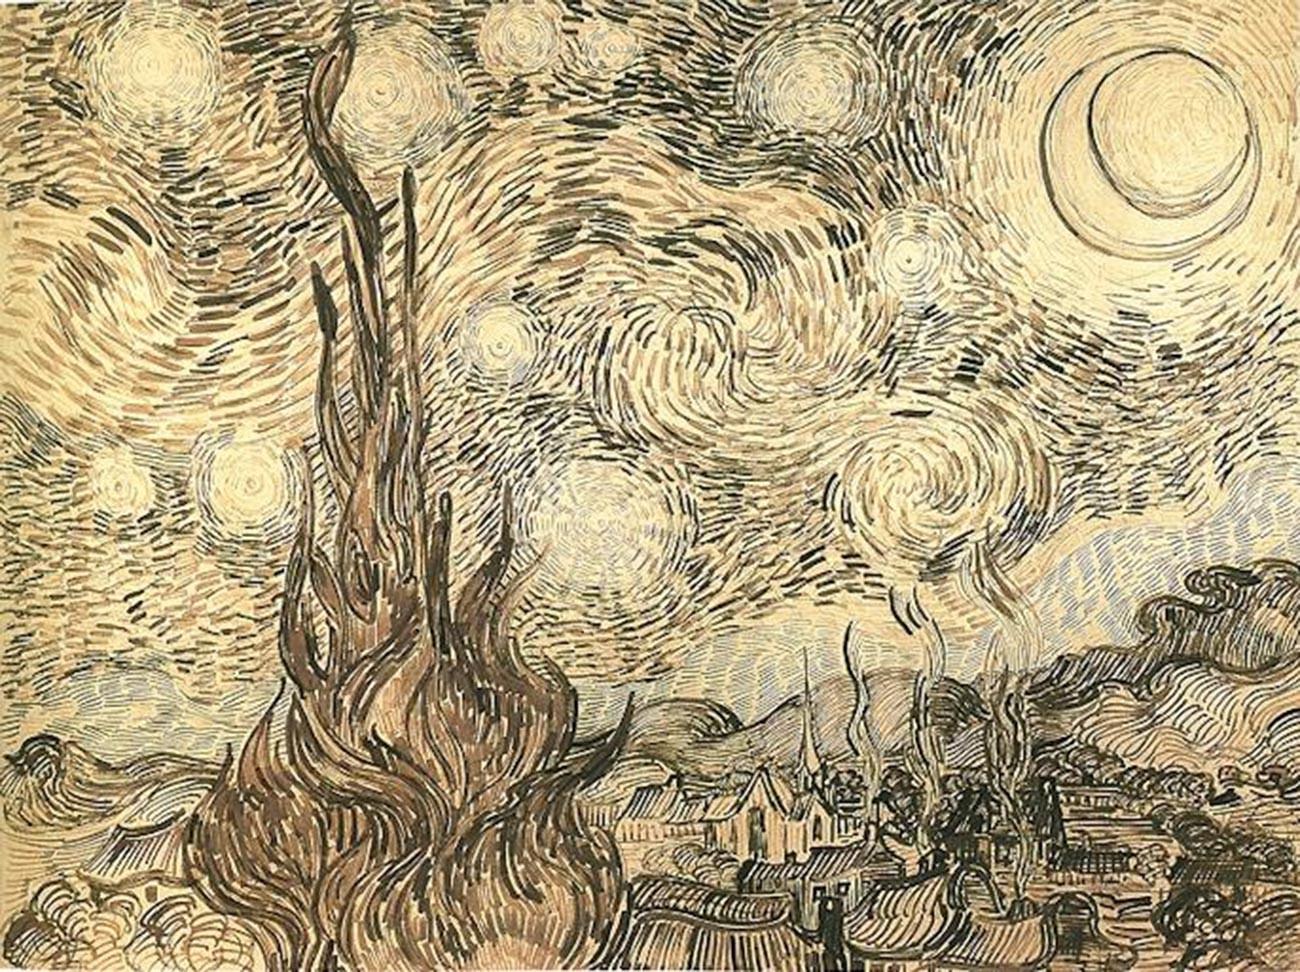 Vincent van Gogh. The Starry Night (drawing)